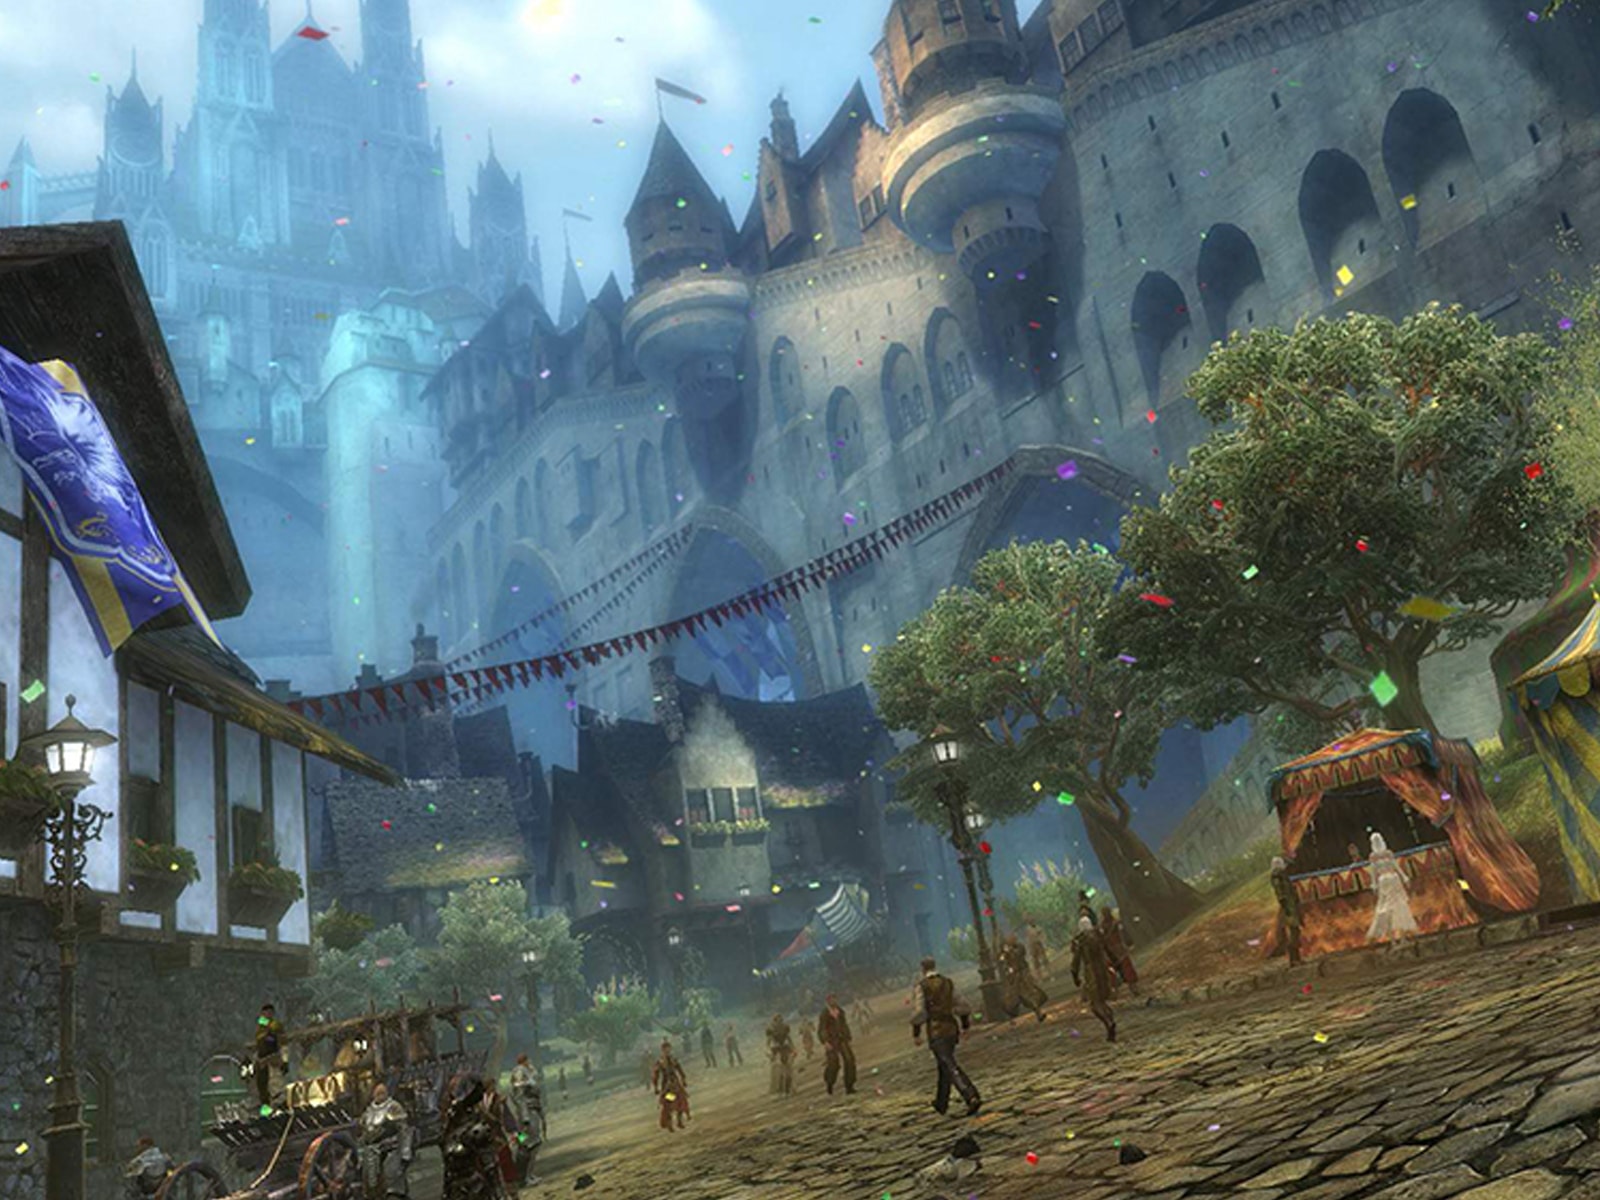 Scene from Guild Wars 2 featuring a village square surrounded by castle-like buildings at twilight